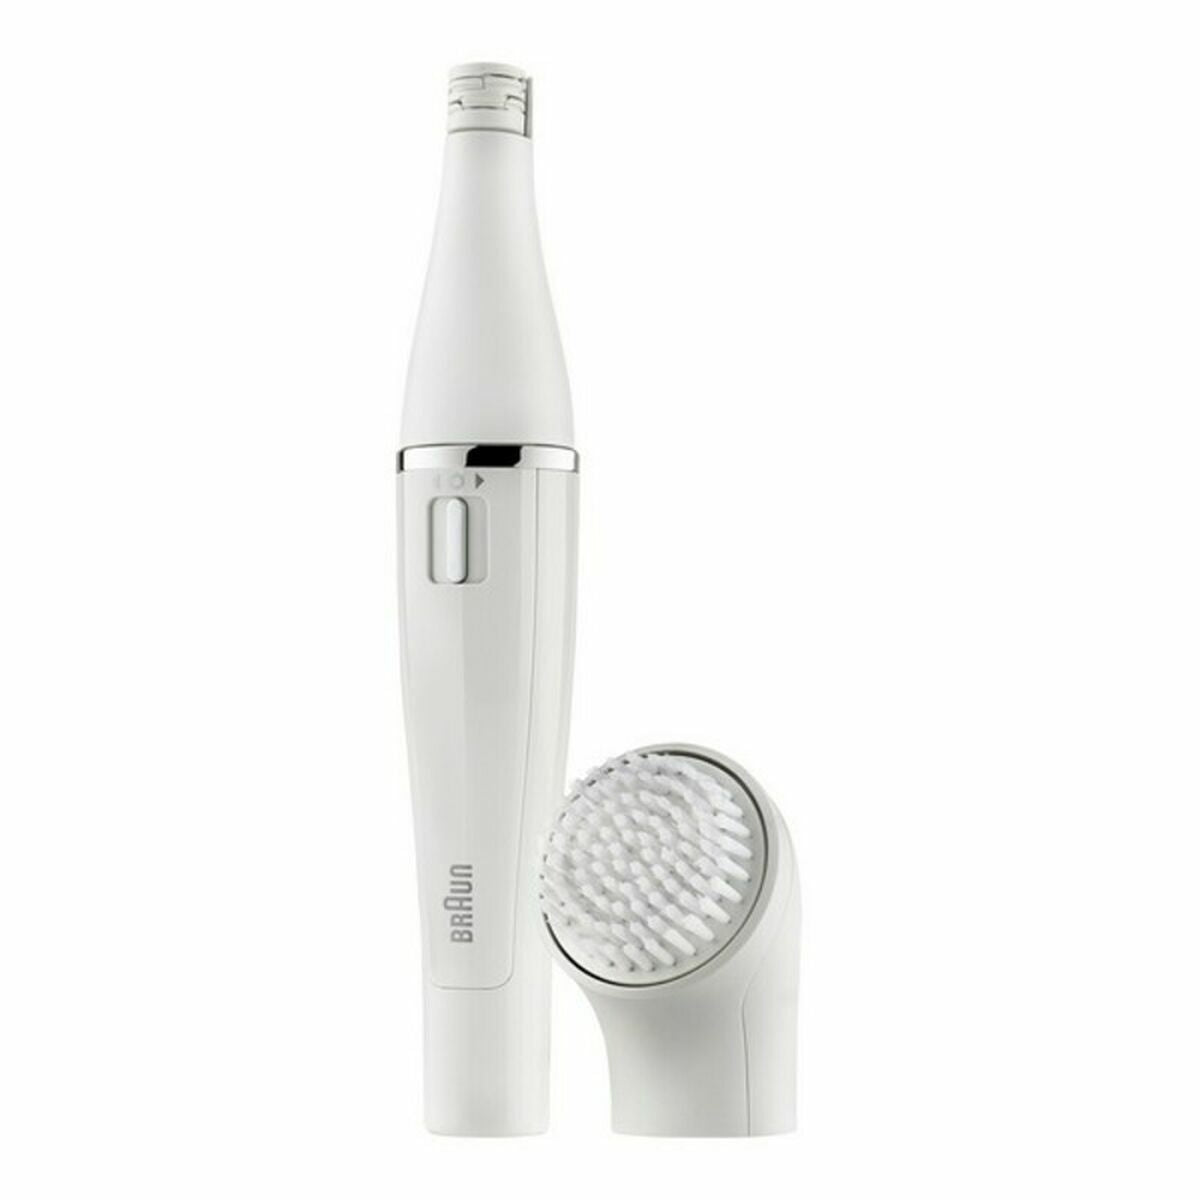 Electric Facial Cleanser/Hair Remover Braun 81458227